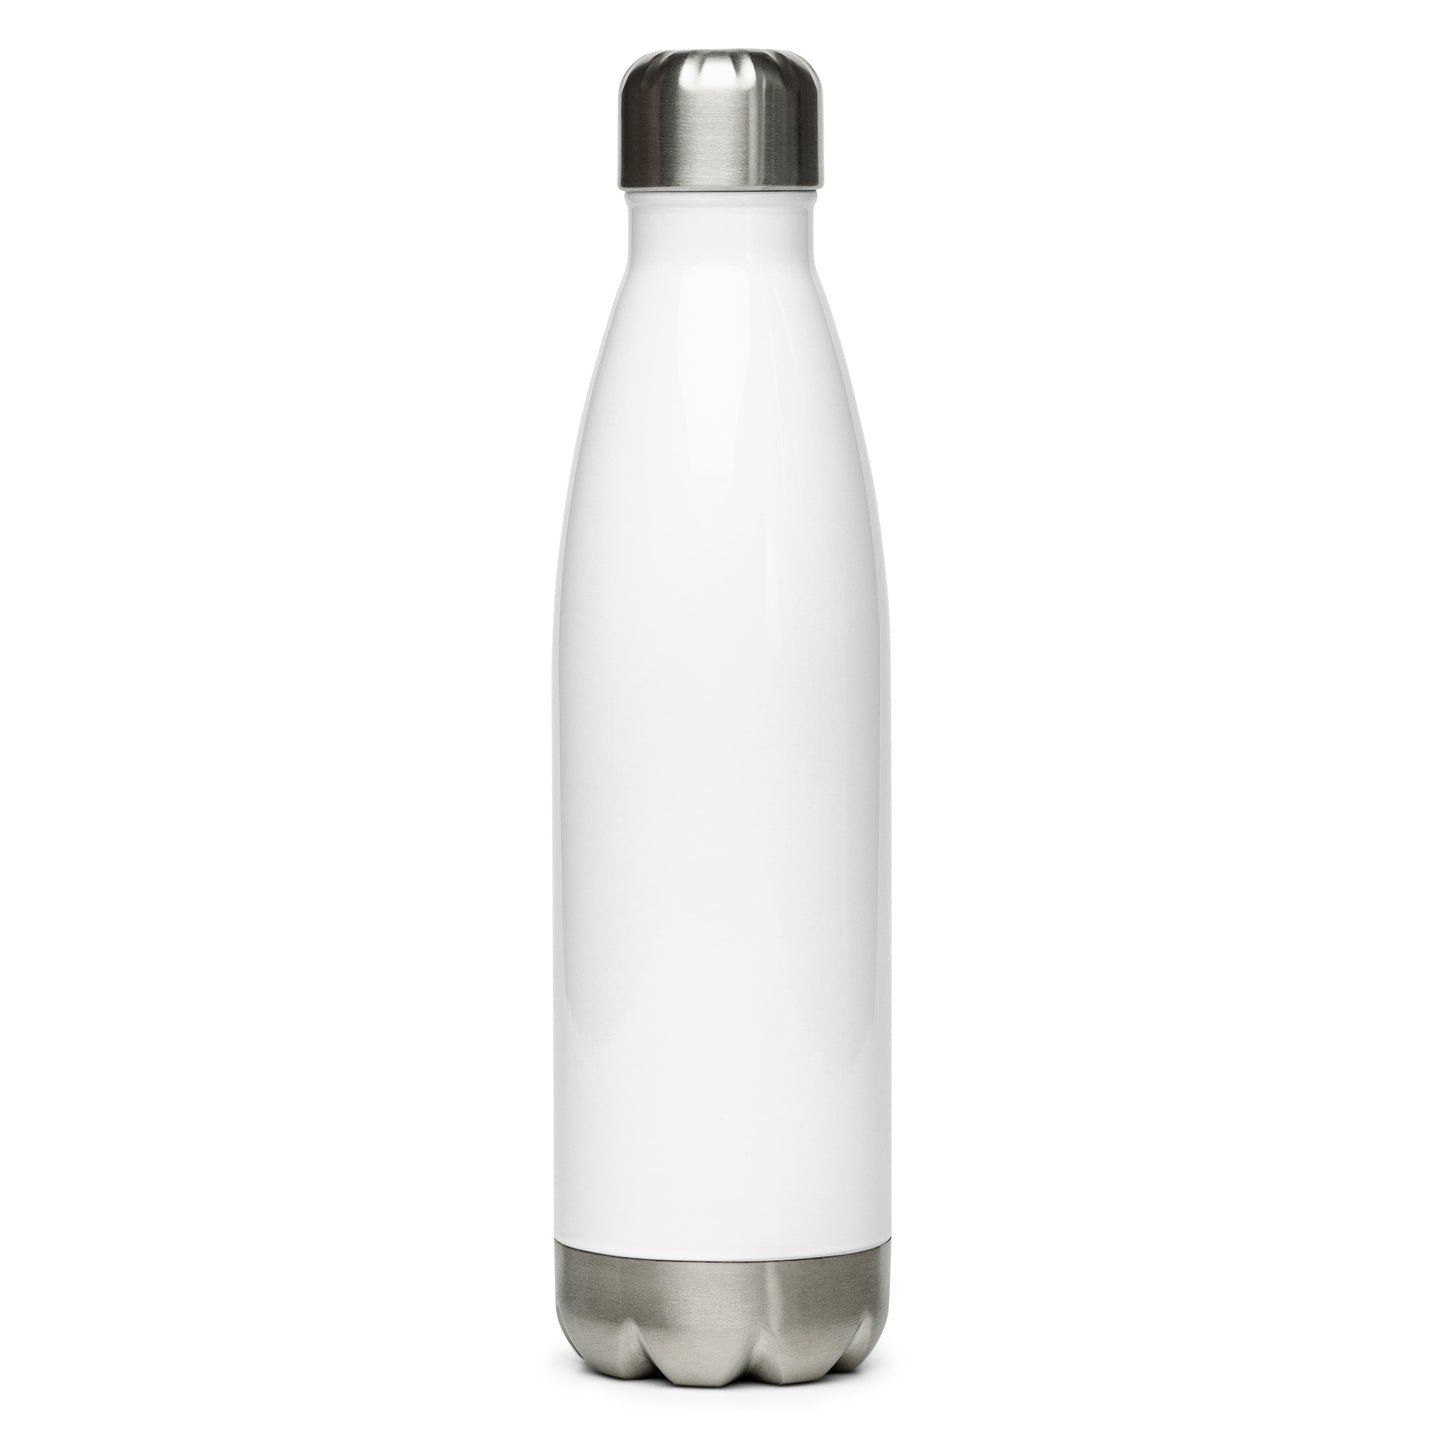 CITY STAINLESS STEEL WATER BOTTLE